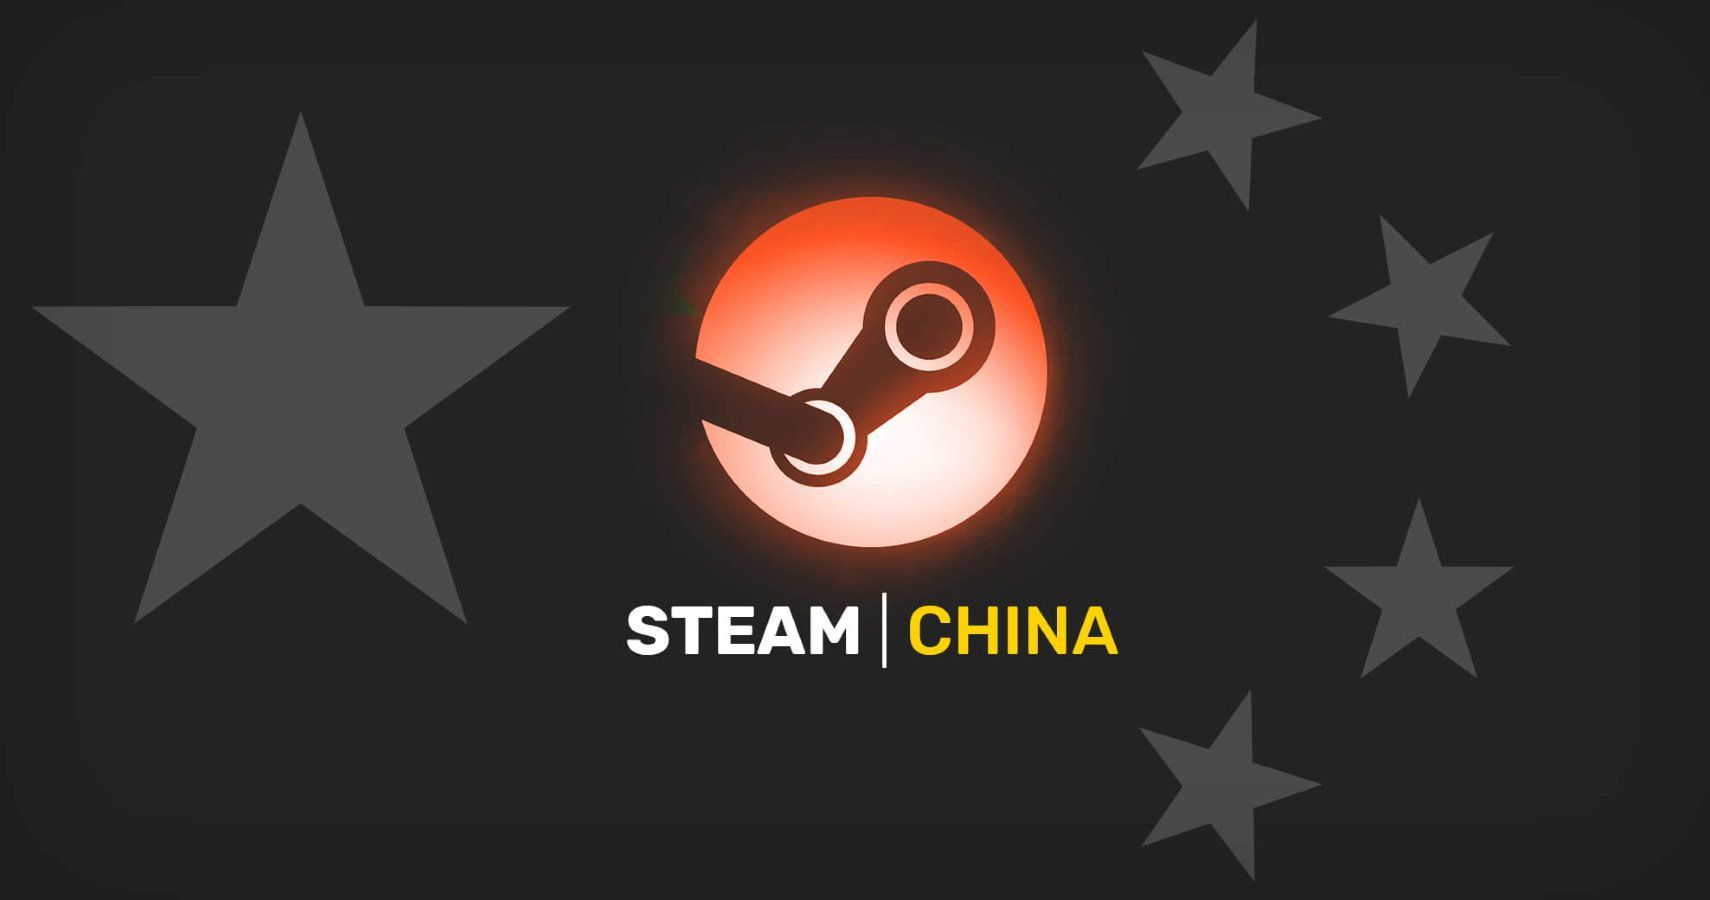 China has blocked the international version of the Steam client